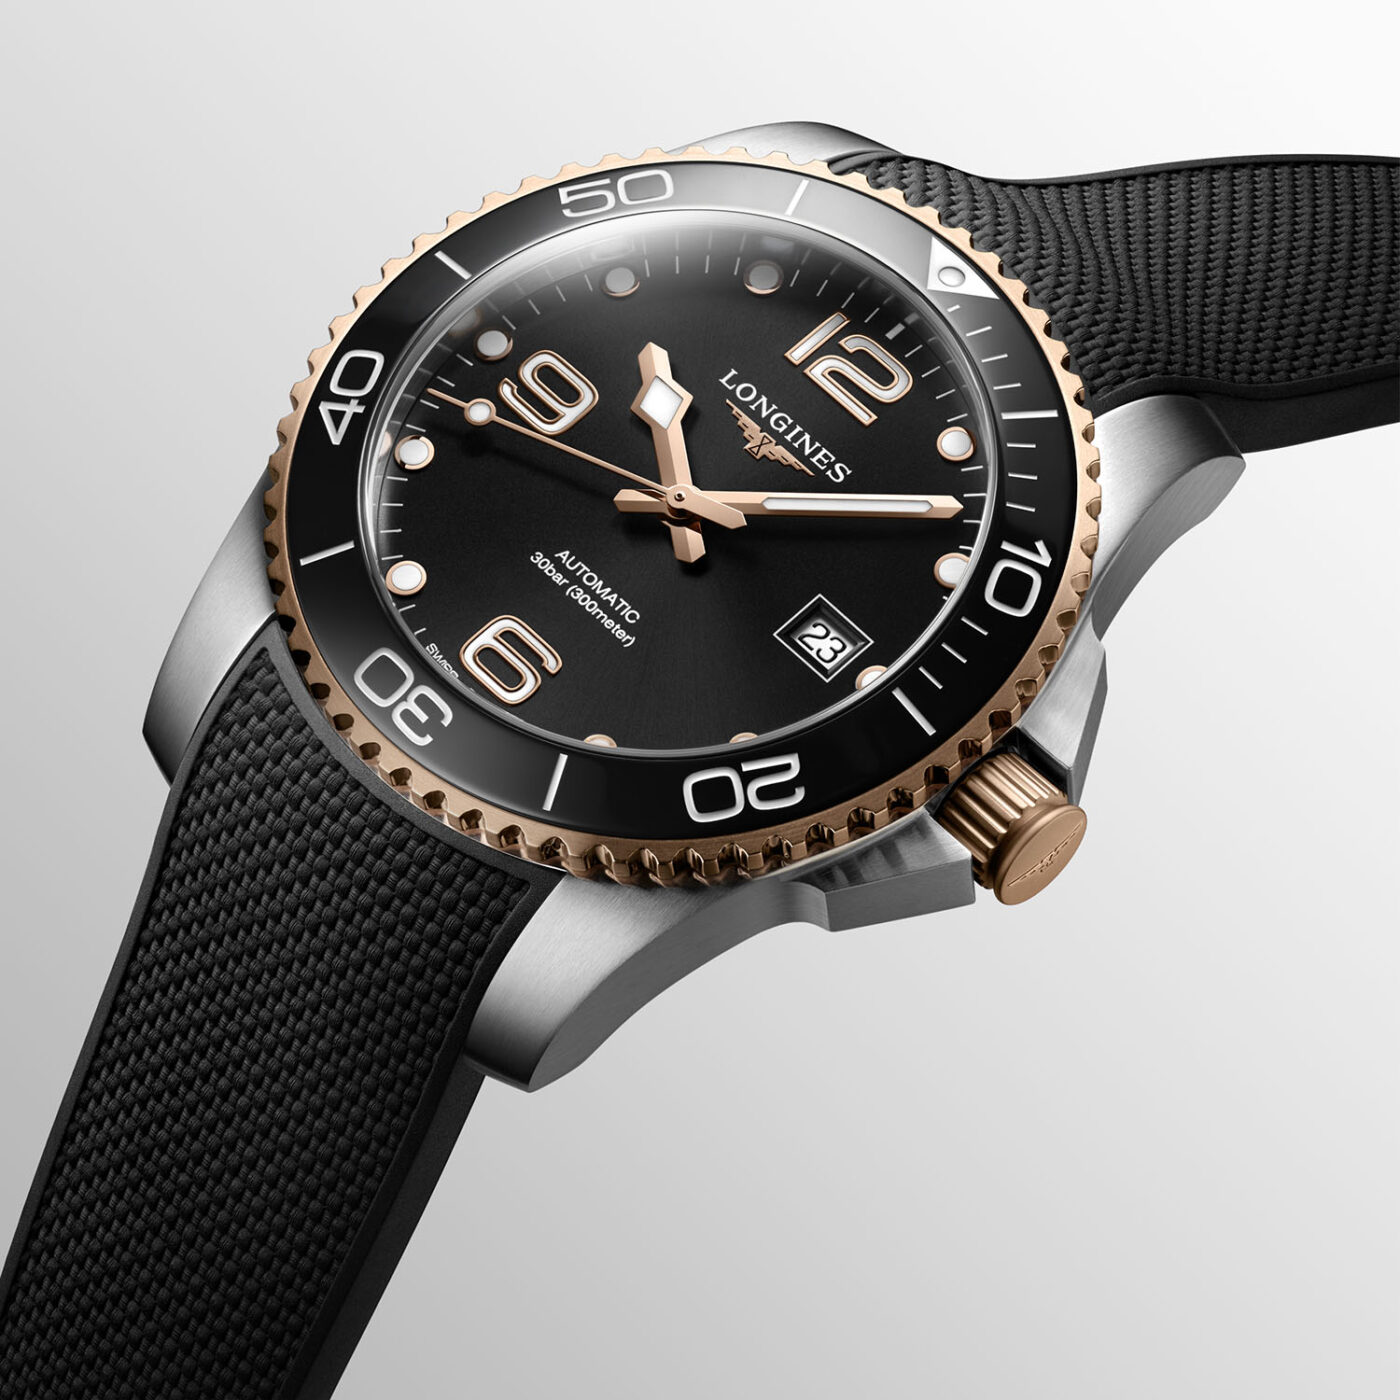 Introducing The Longines HydroConquest 41mm TwoTone Watches